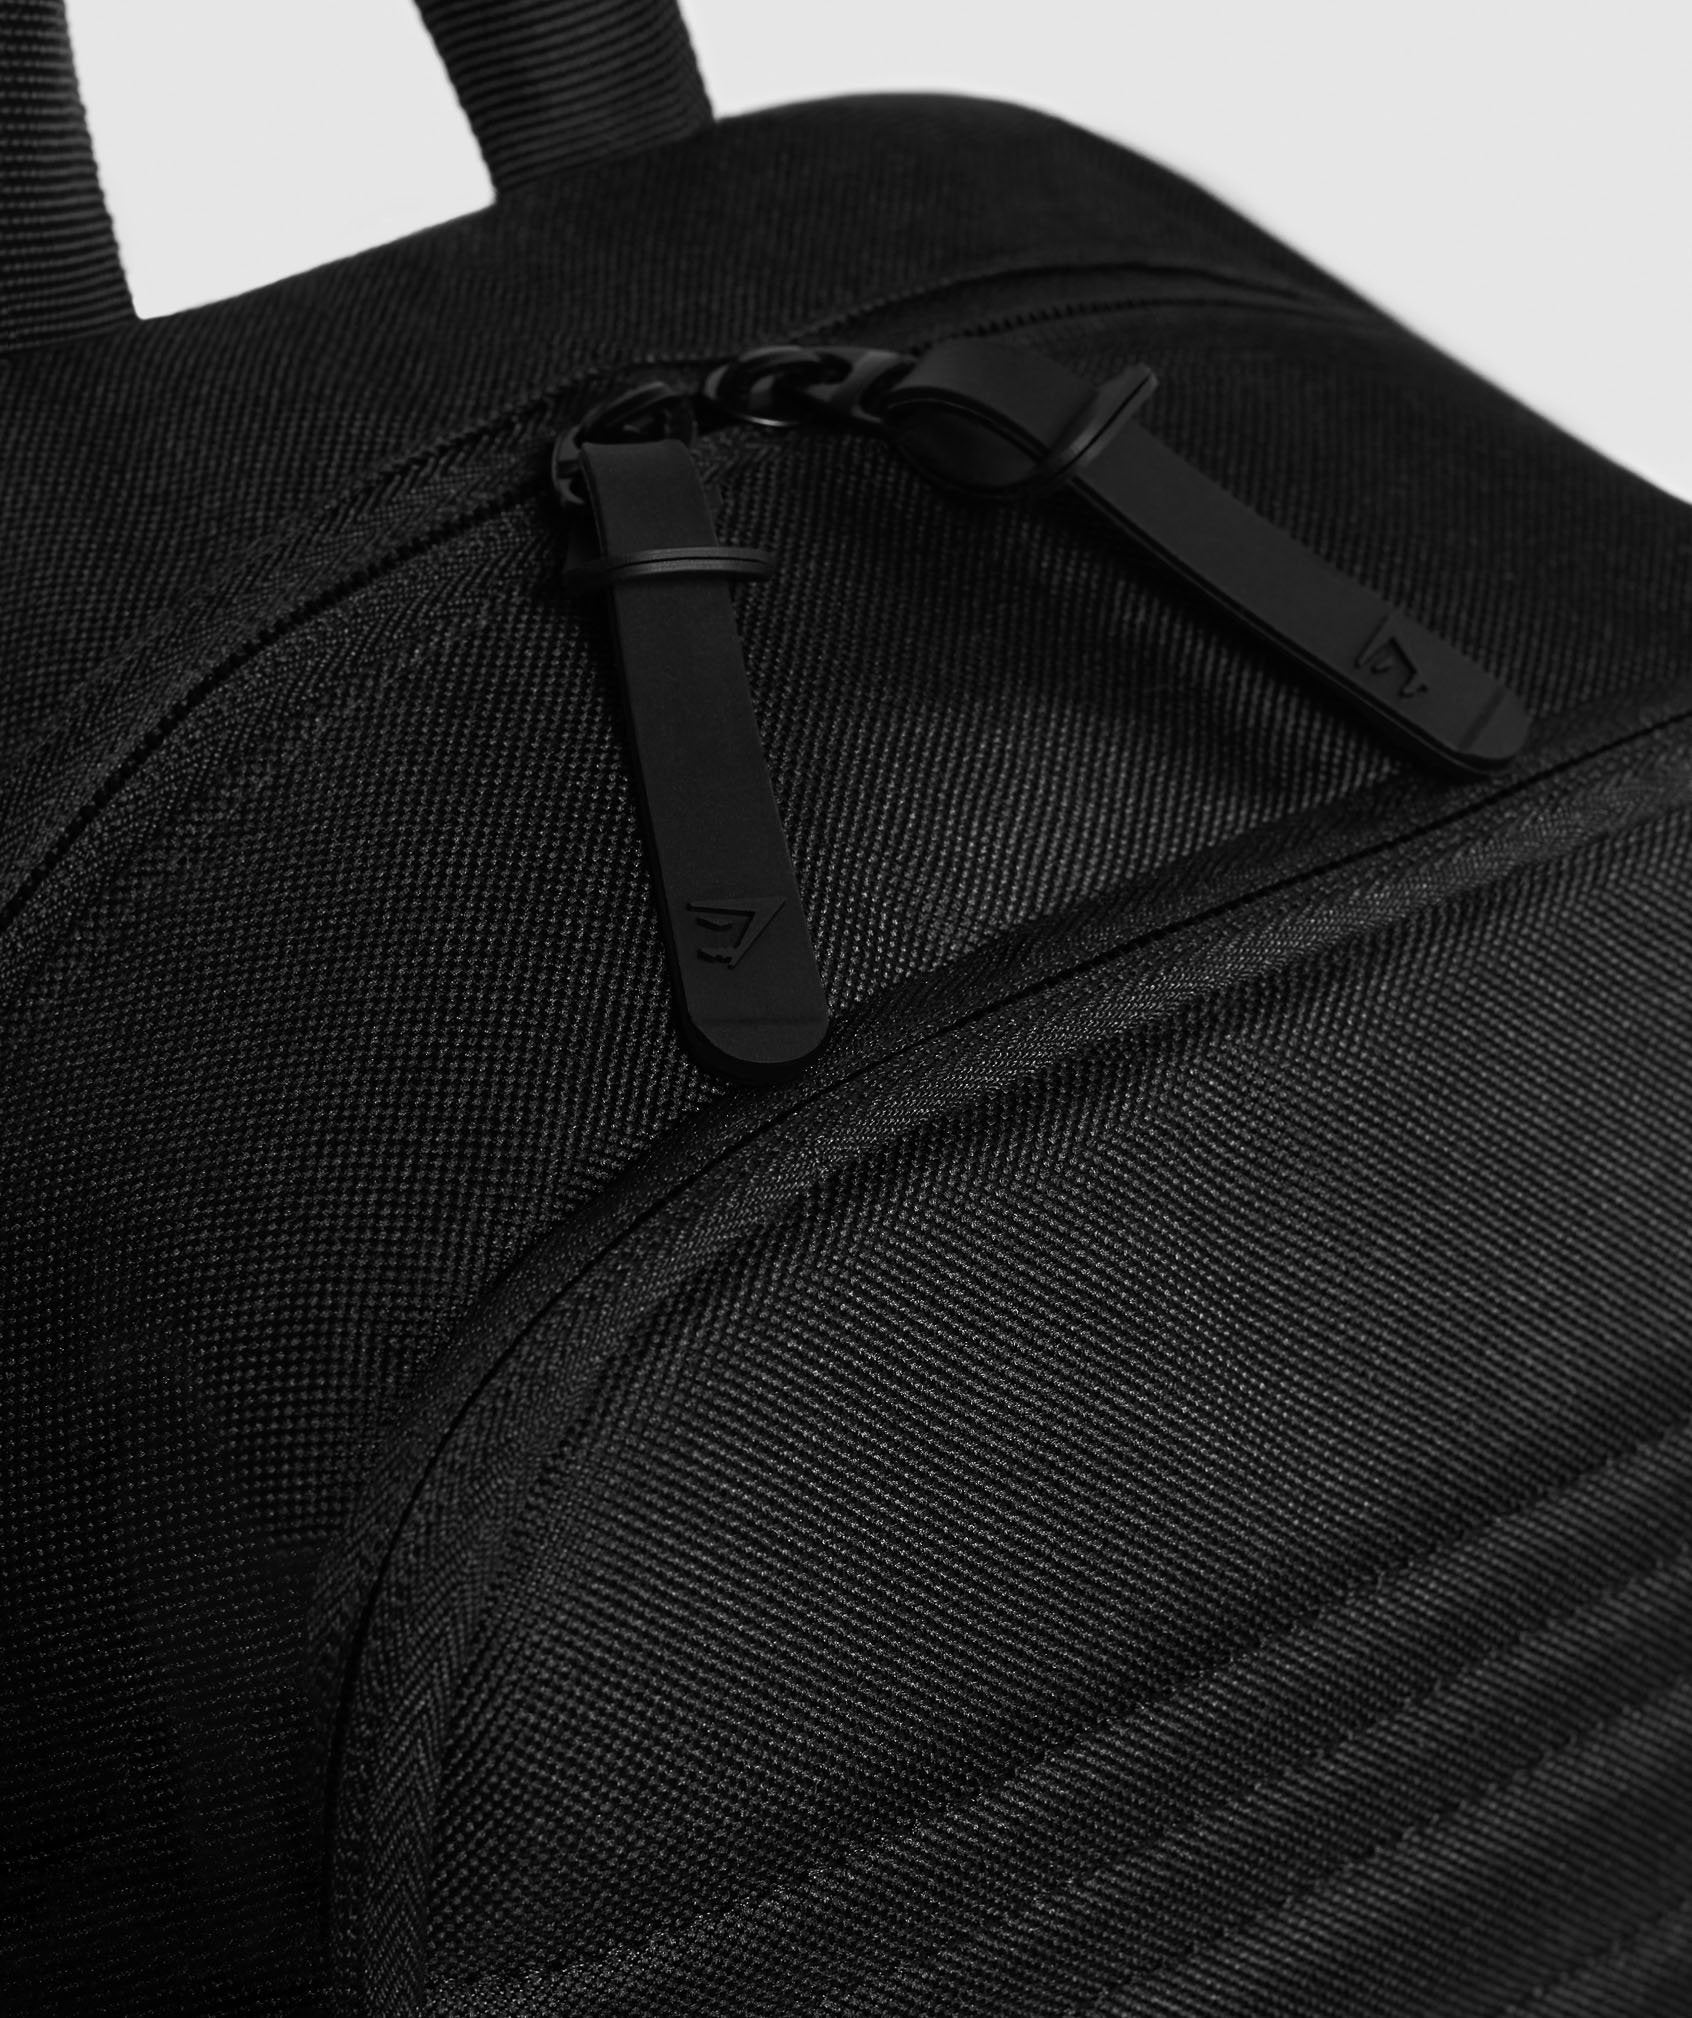 GS Backpack in Black - view 6